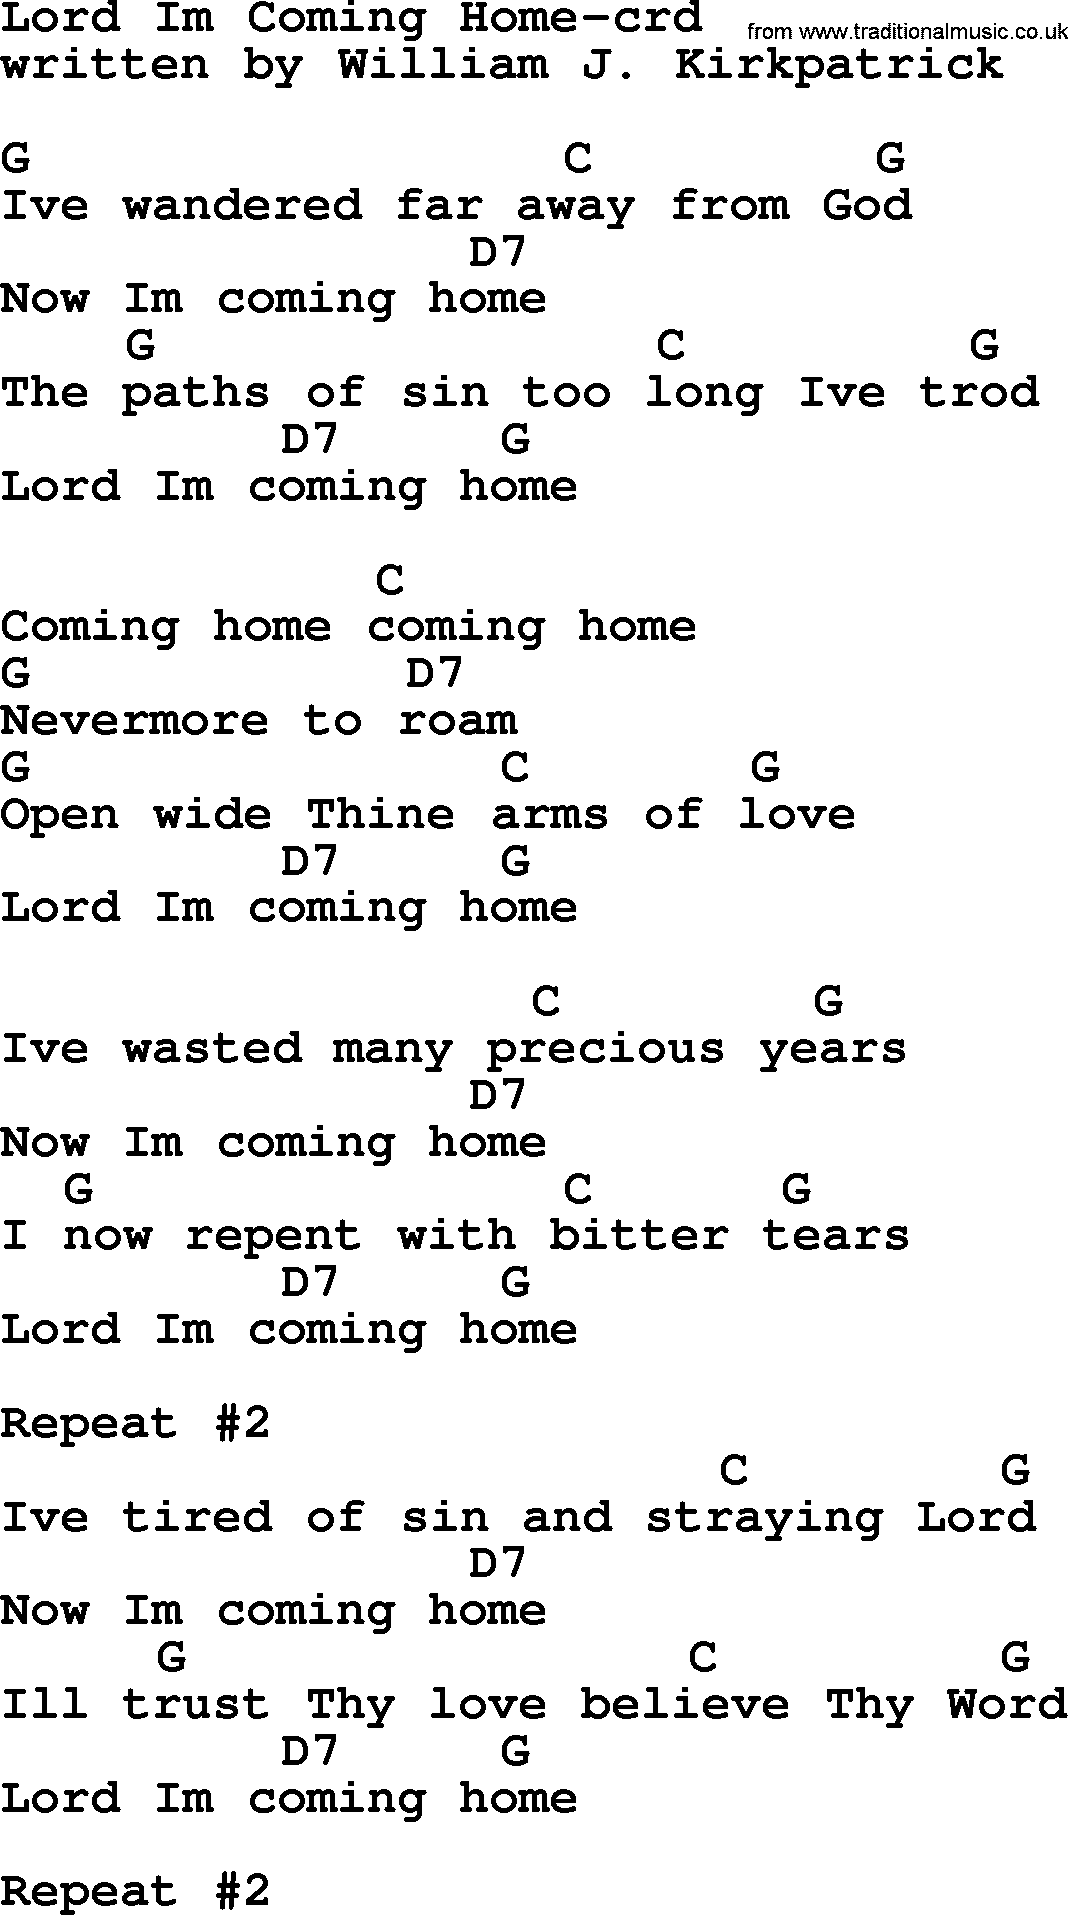 Top 500 Hymn: Lord I'm Coming Home, lyrics and chords